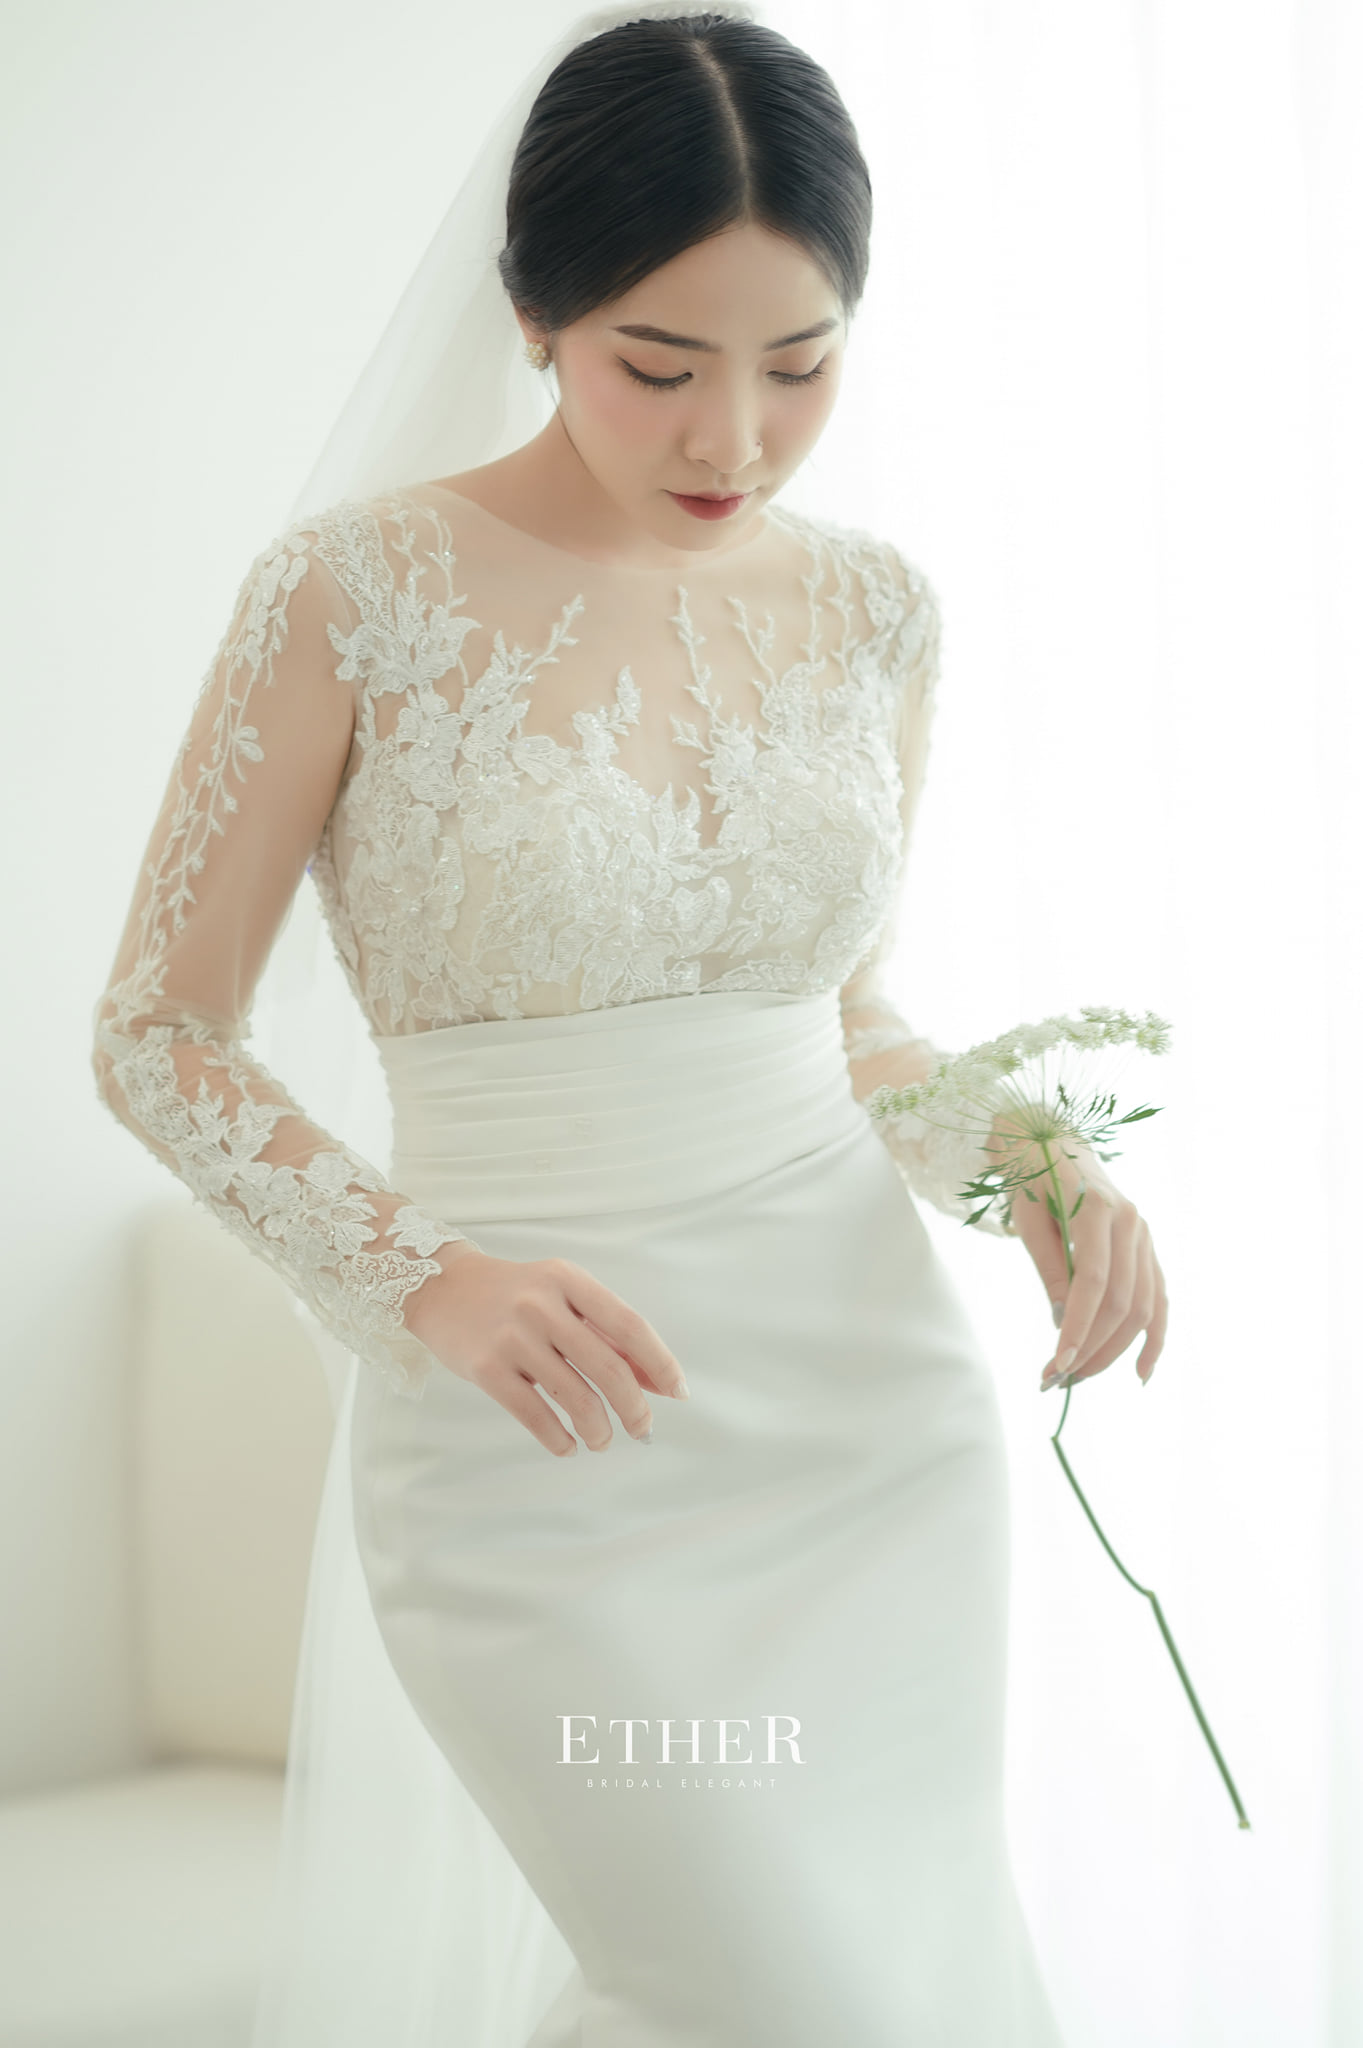 Lace wedding dress helps the bride become gentle and delicate